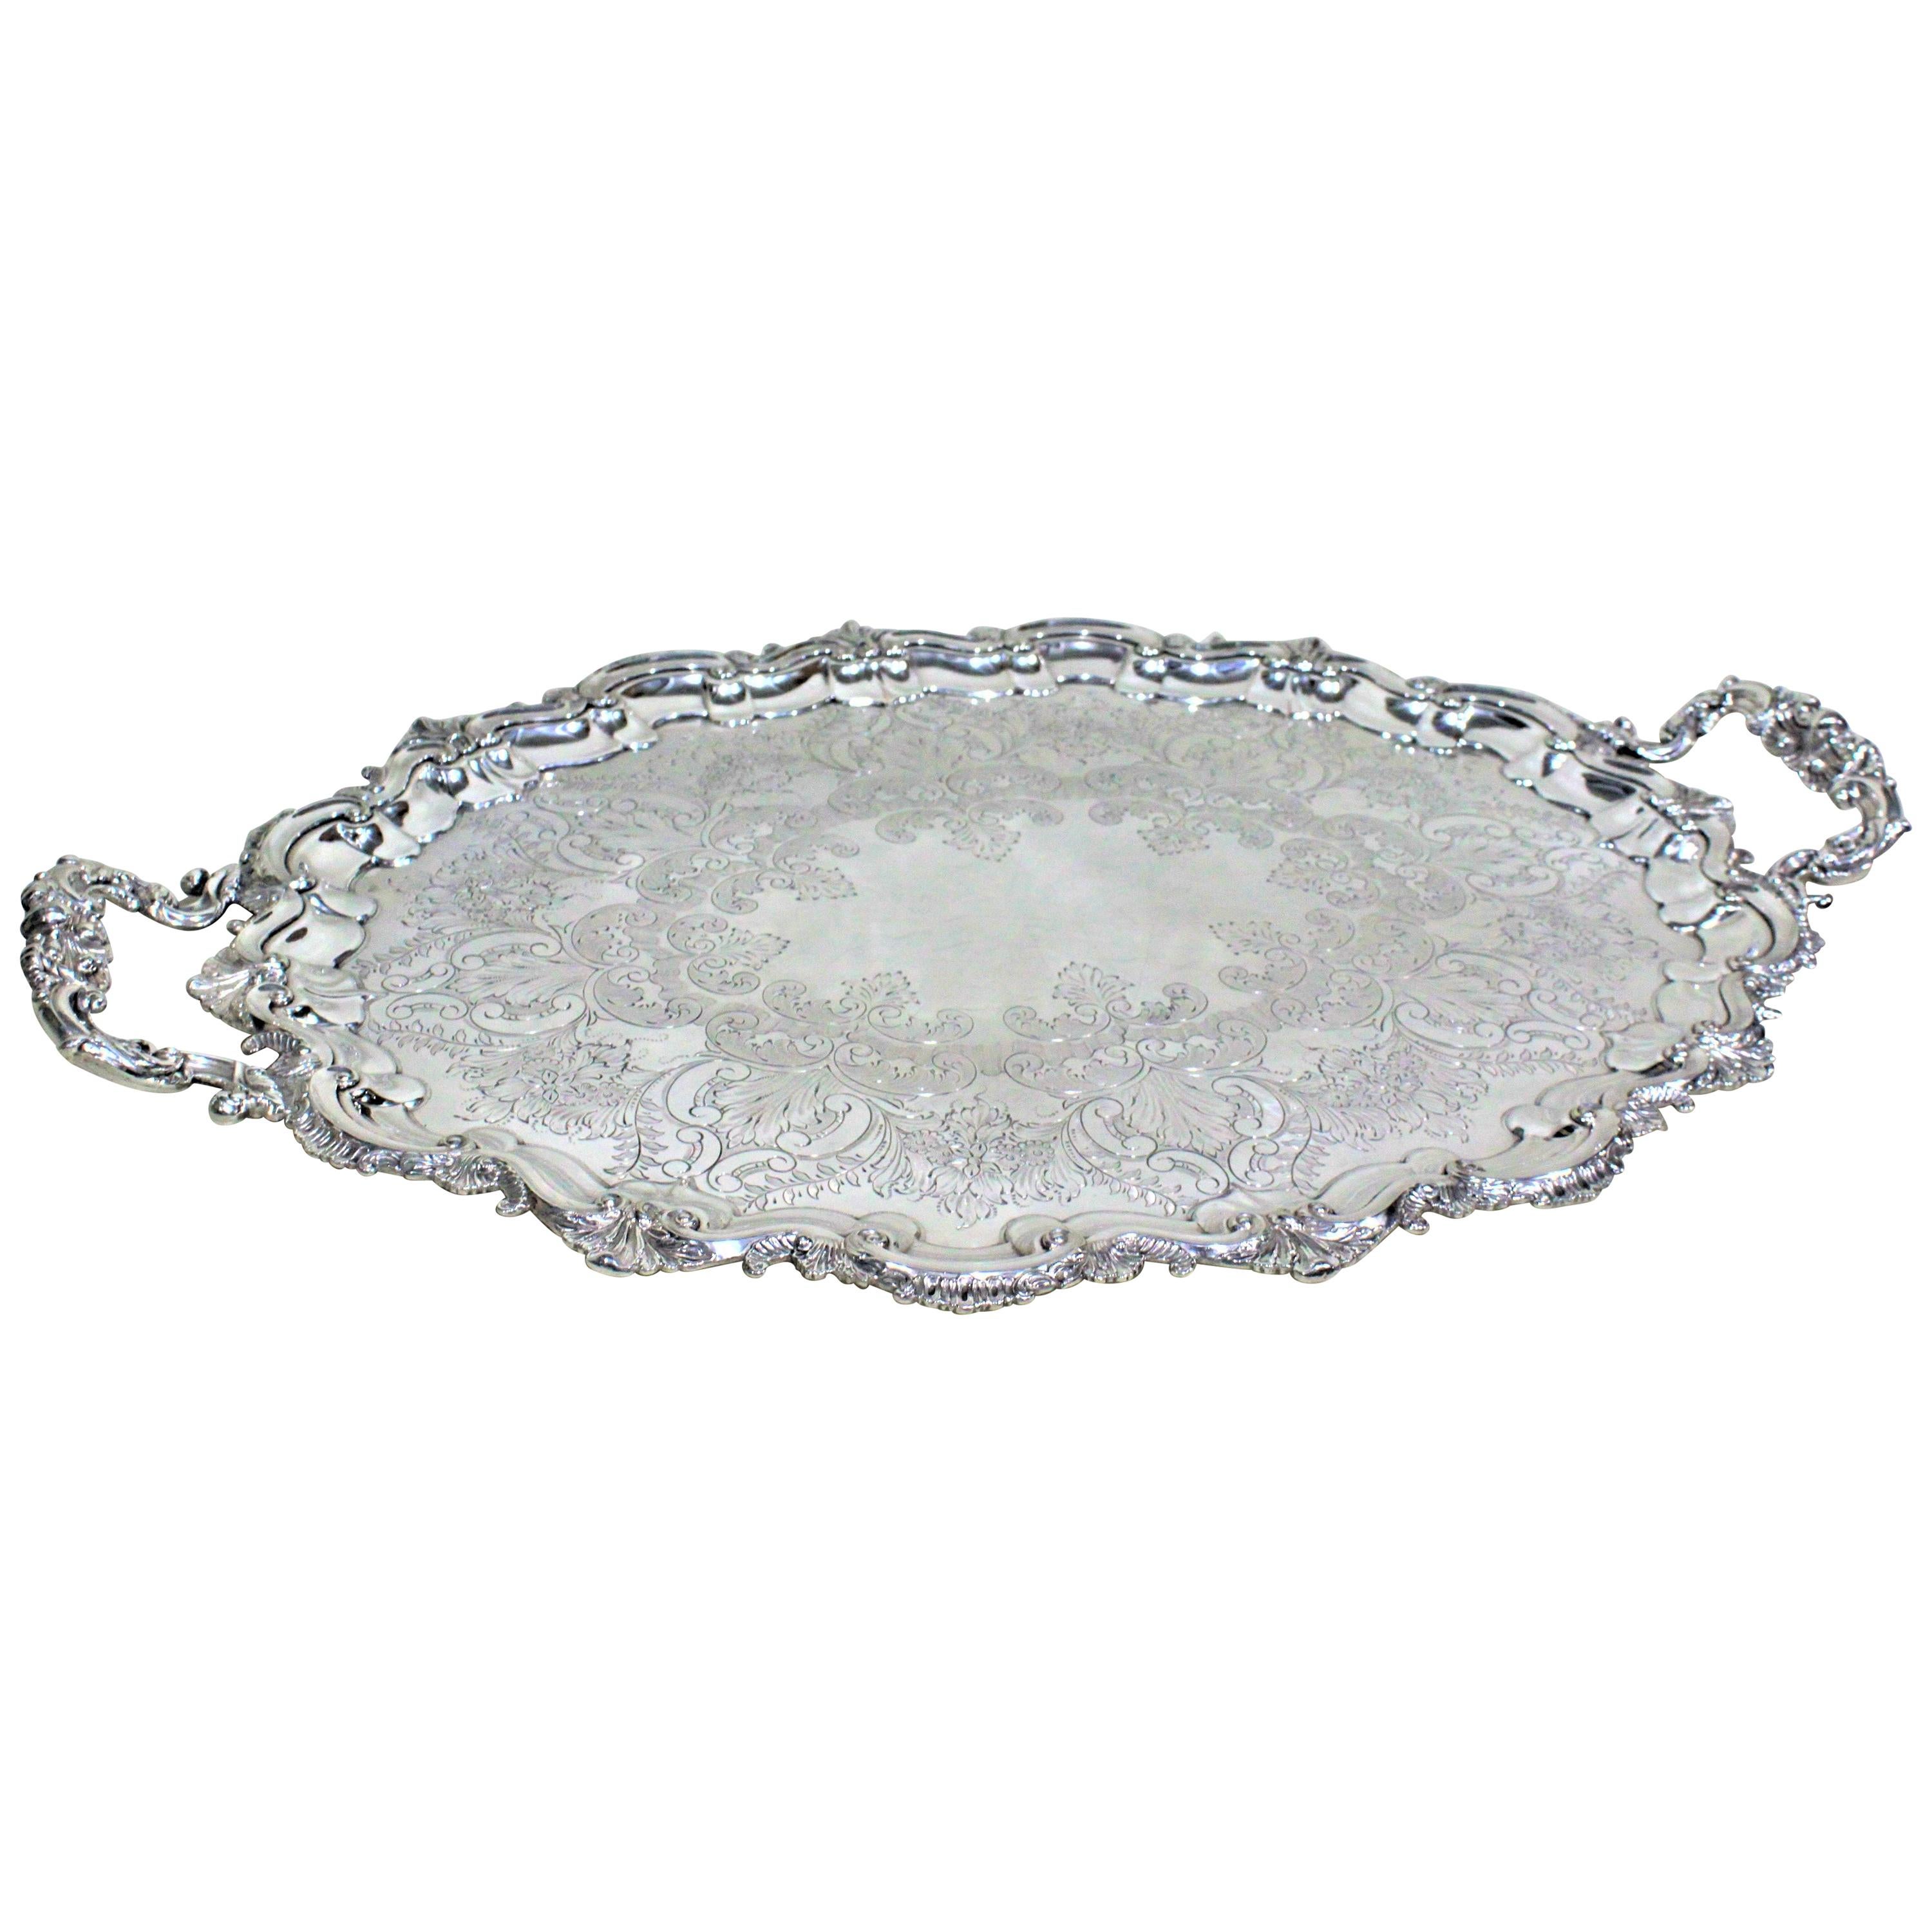 Antique Victorian Styled Scalloped Oval Silver Plated Engraved Serving